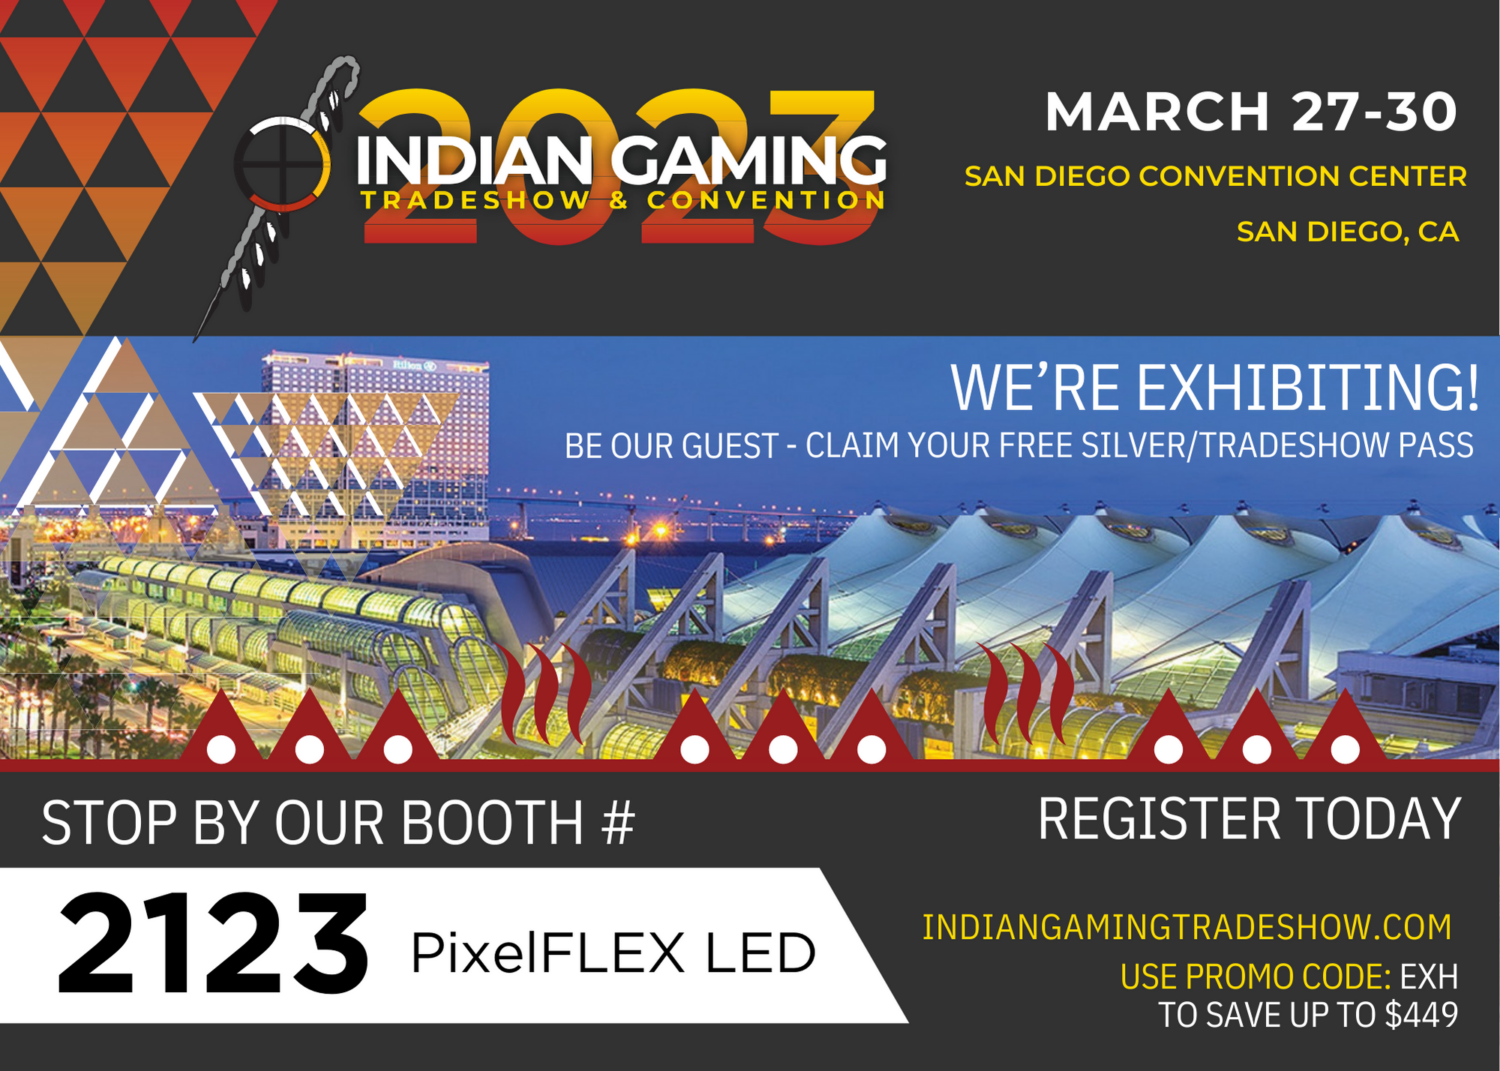 PixelFLEX to Debut at the Indian Gaming Trade Show and Convention